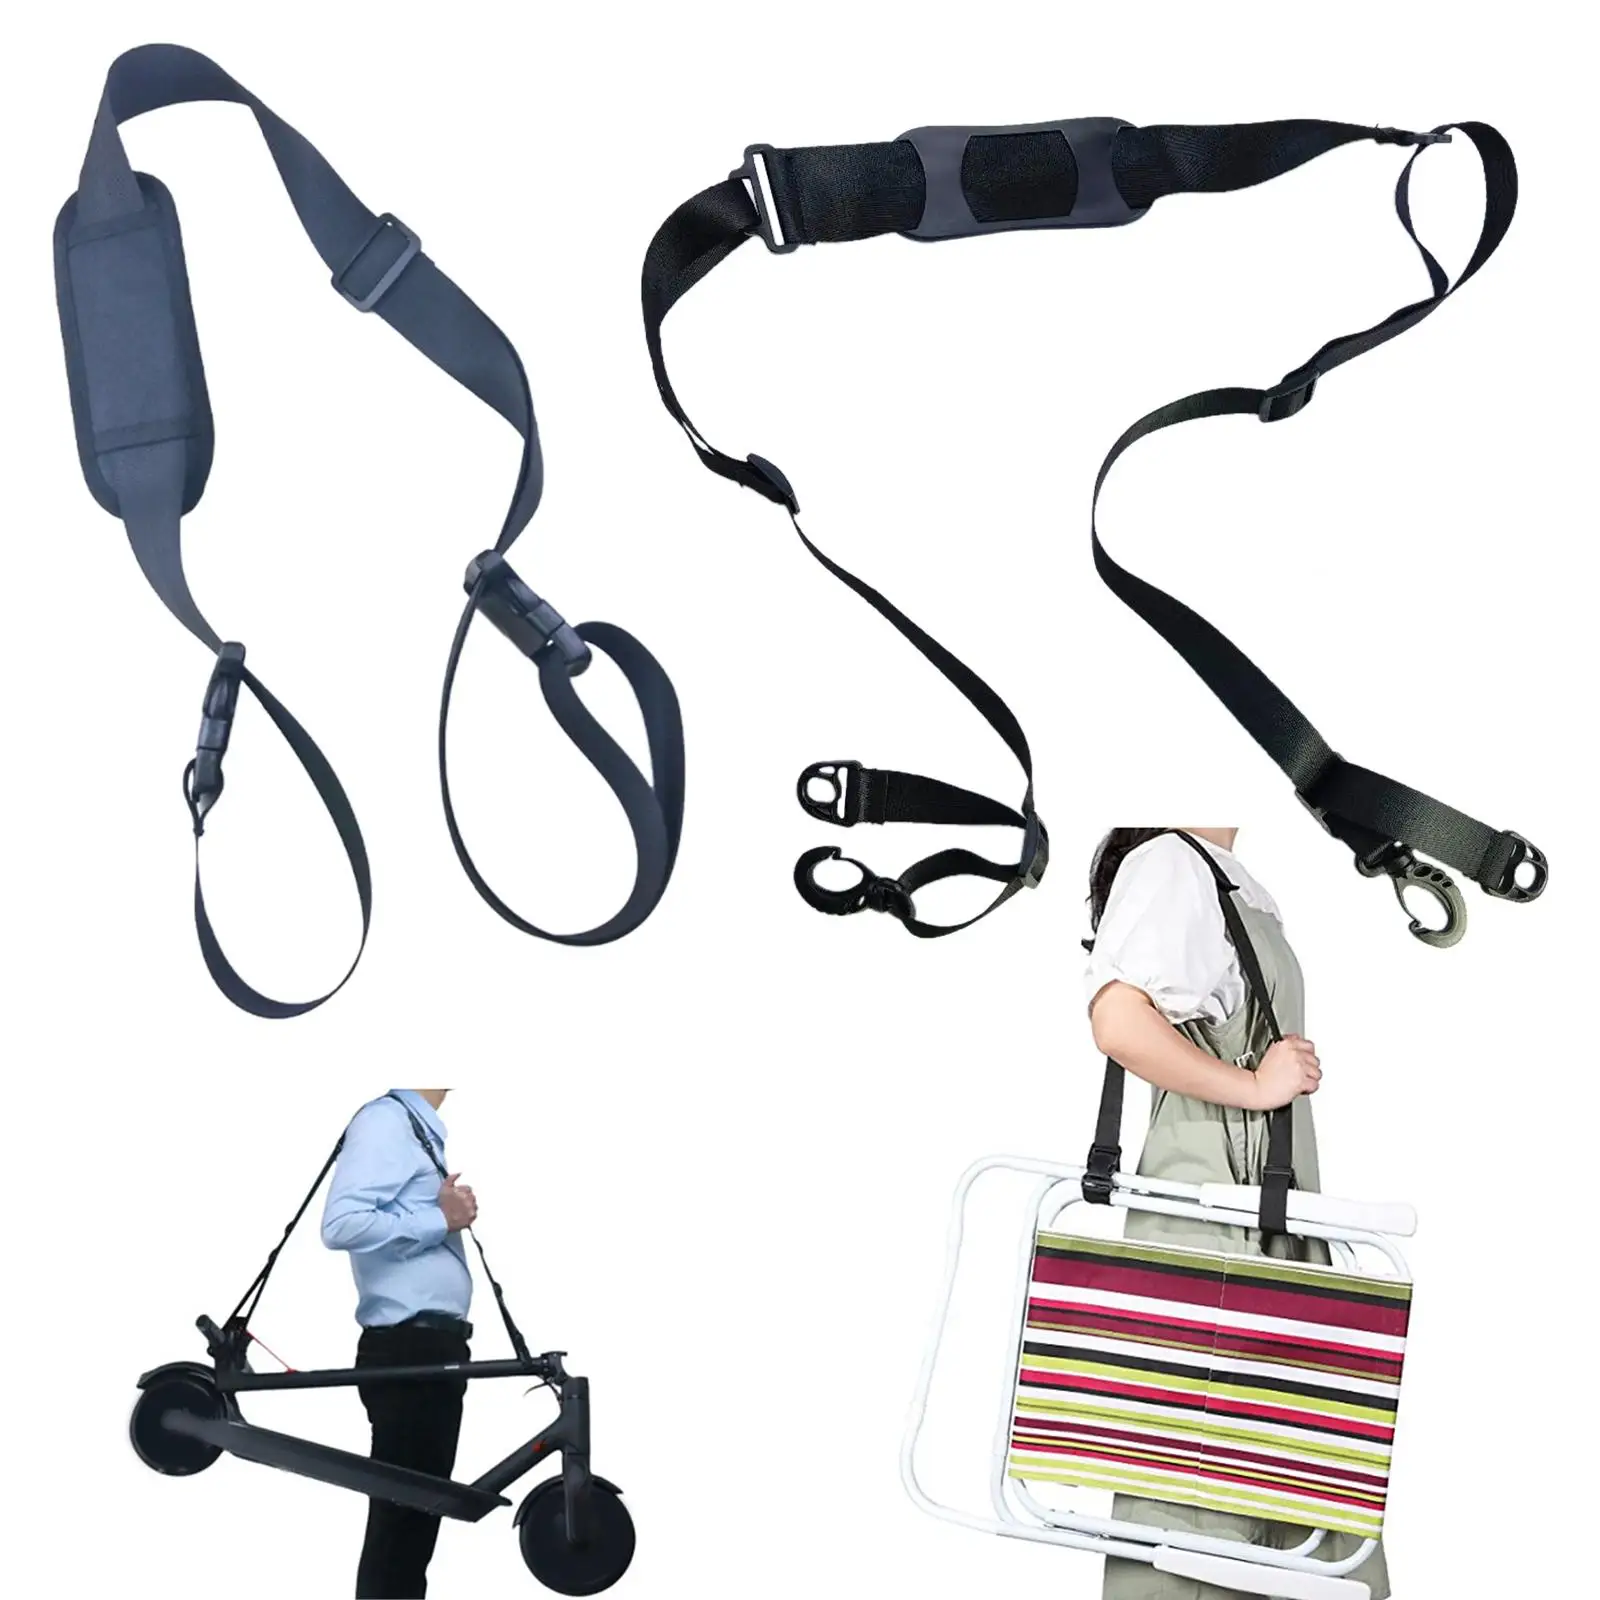 Carry Strap for Beach Chair, Adjustable Shoulder Carrying Straps